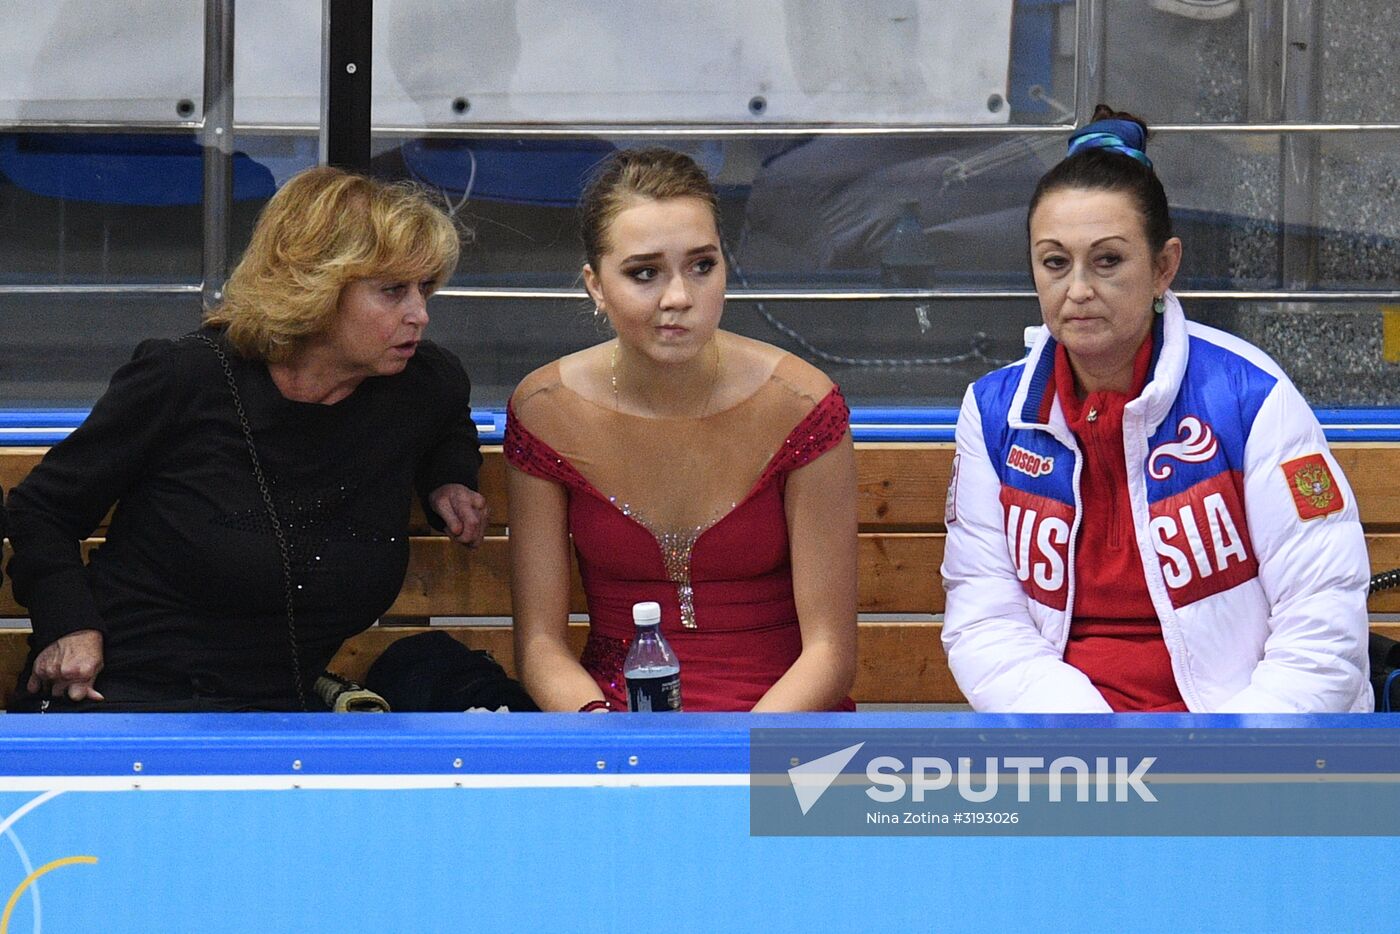 Russian figure skating team's trials. Day two